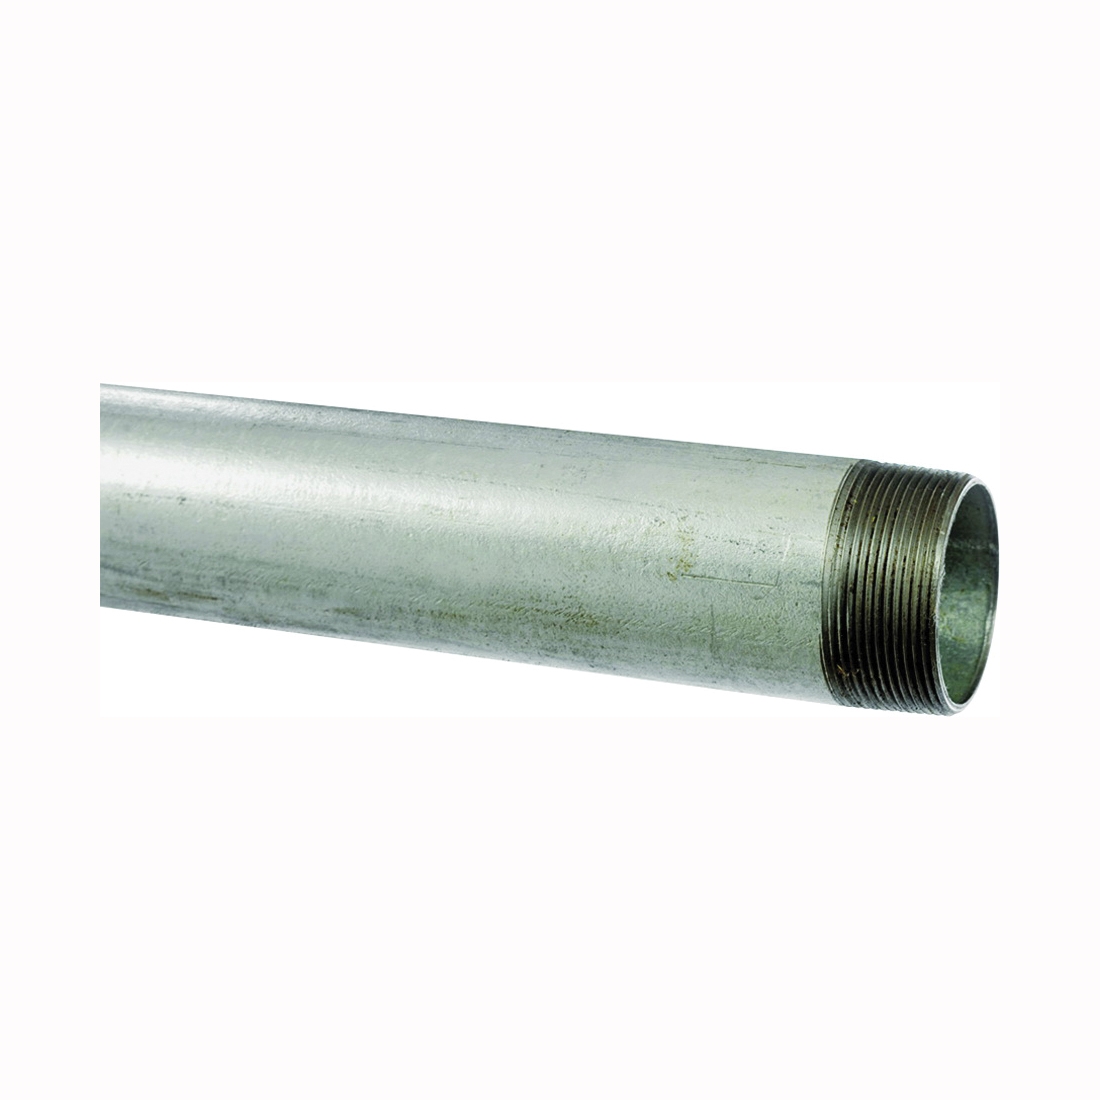 GALV 1/2 Pipe, 1/2 in, 21 ft L, Threaded